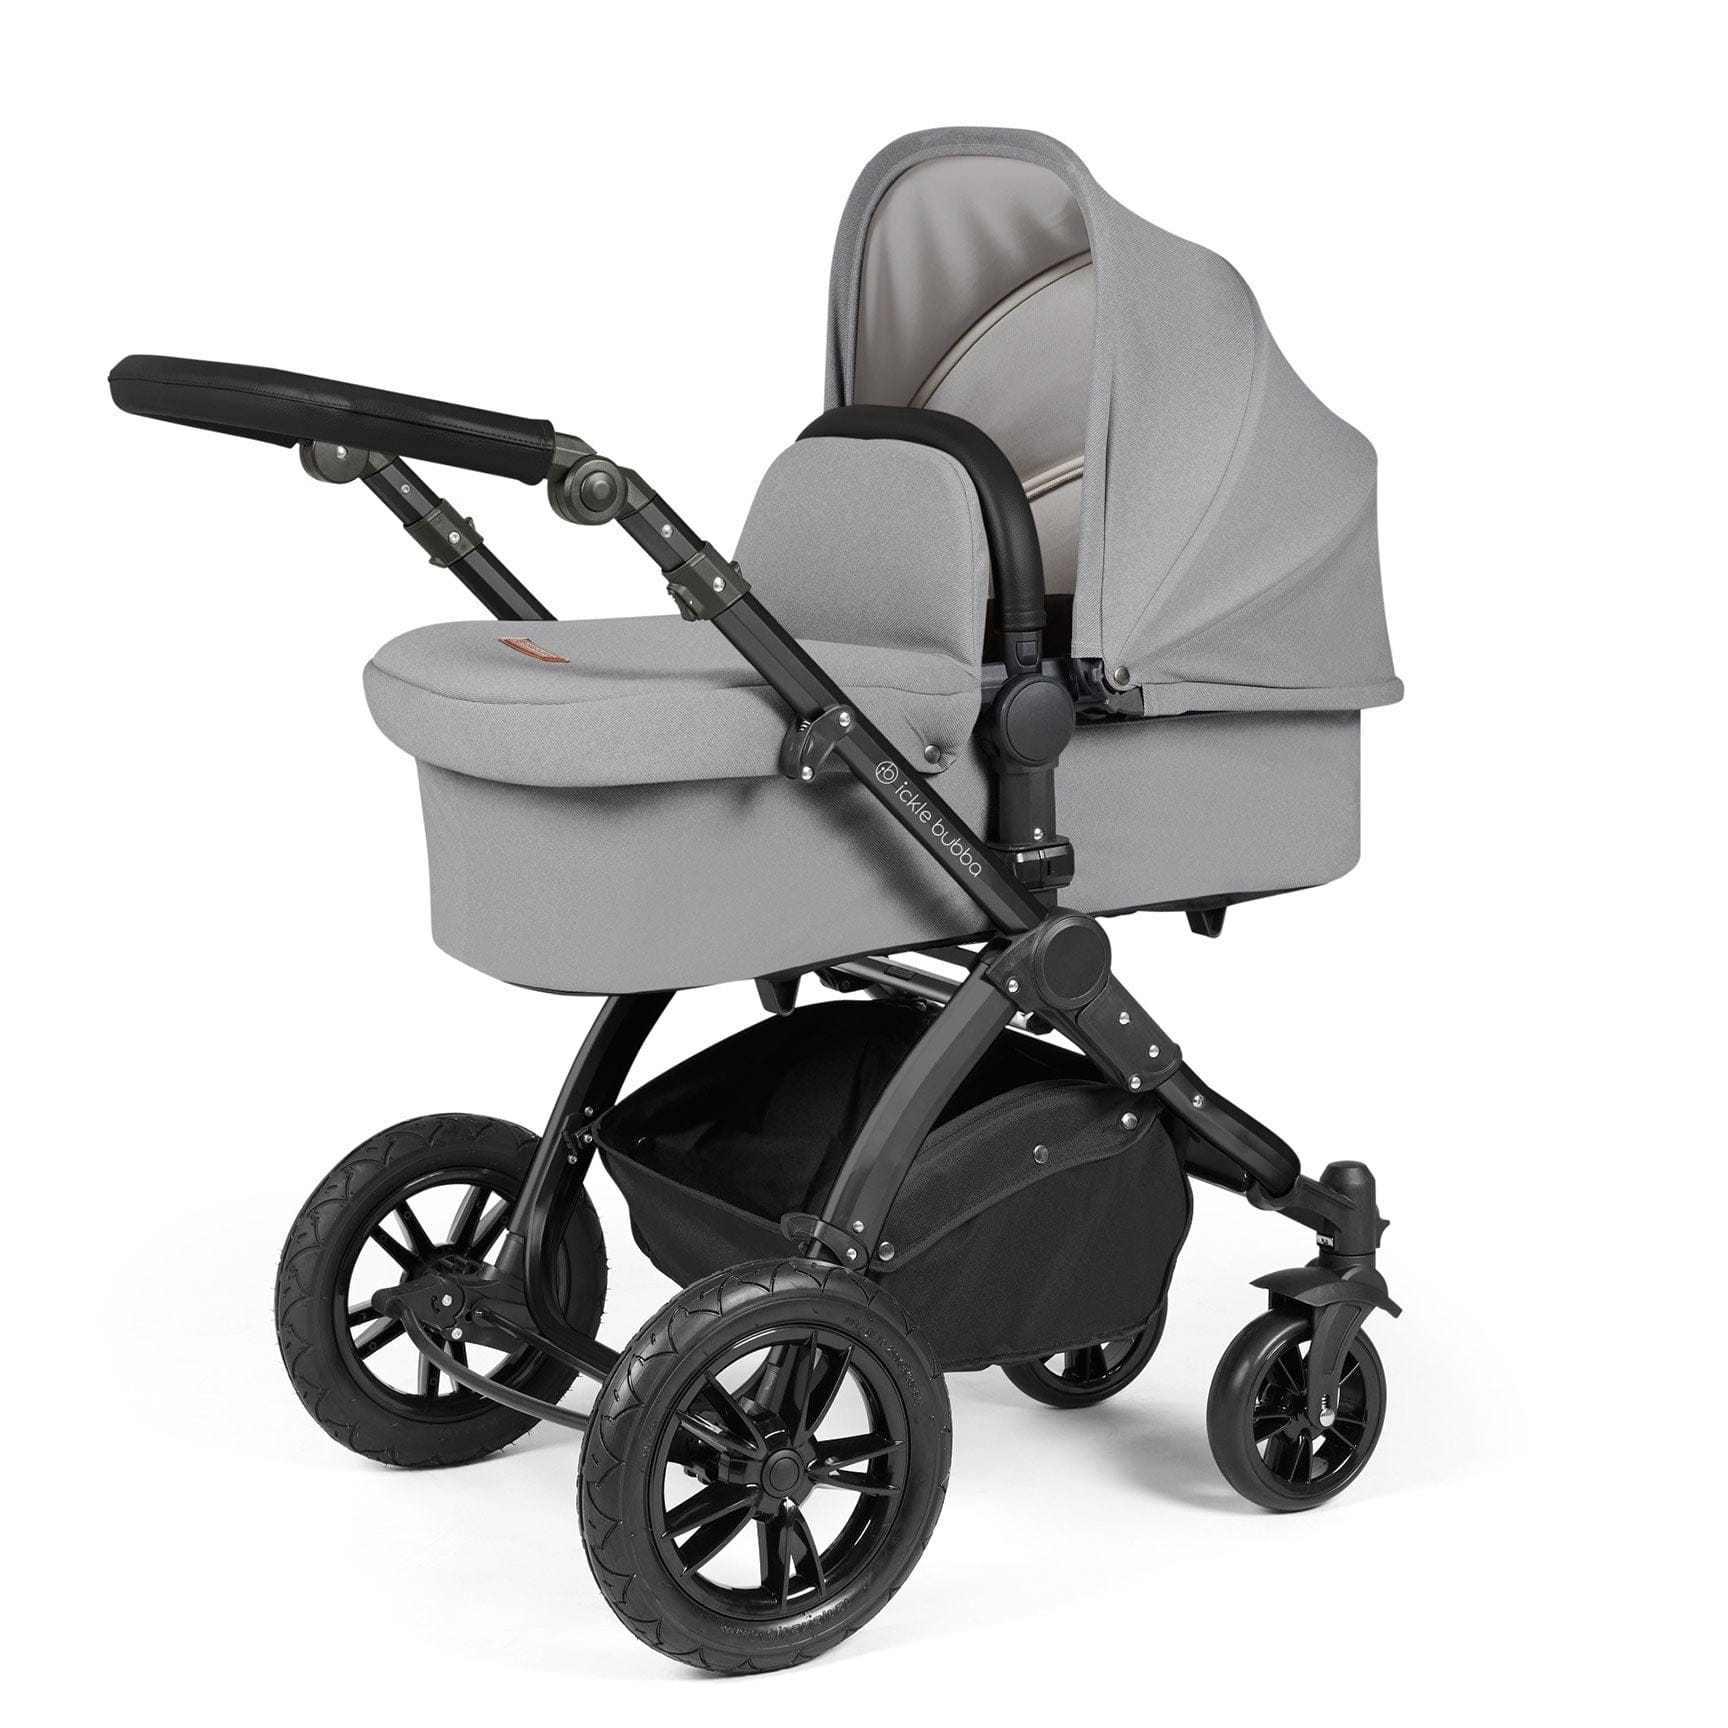 Ickle Bubba Stomp Luxe All-in-One Travel System with Isofix Base in Black/Pearl Grey/Black Travel Systems 10-011-300-210 5056515026474